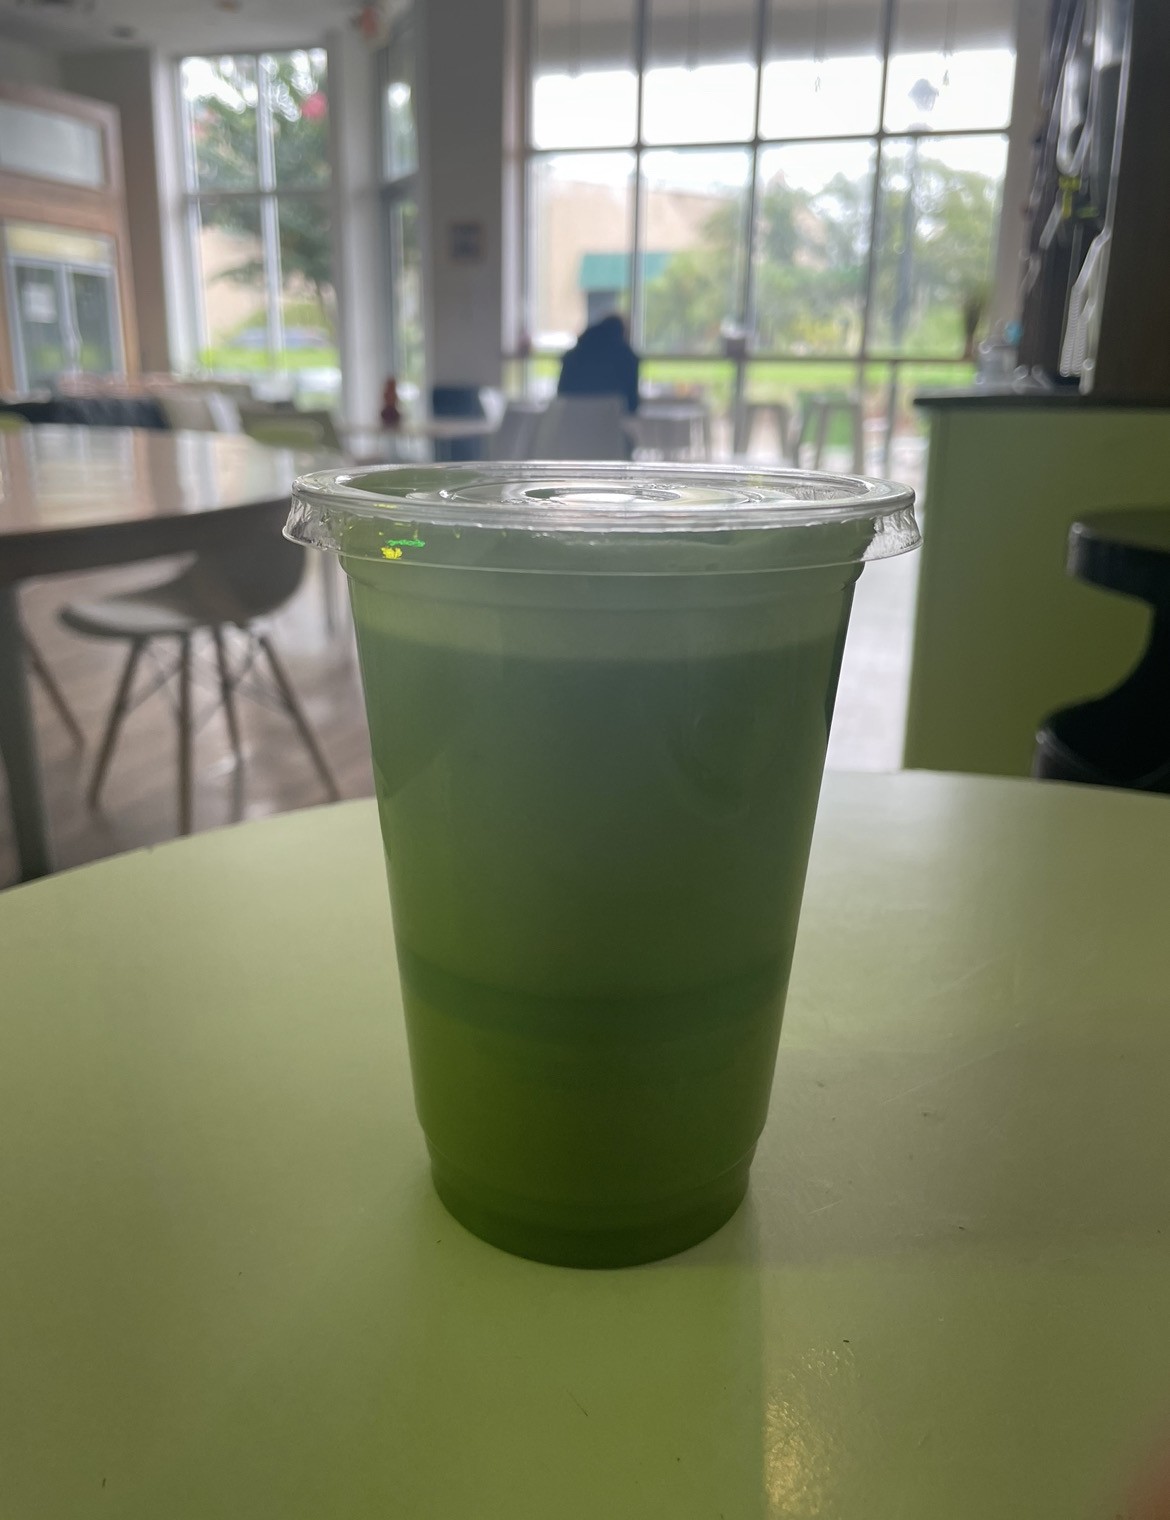 Formula Fresh is located at Destin Commons and offers juices, smoothies, and bowls